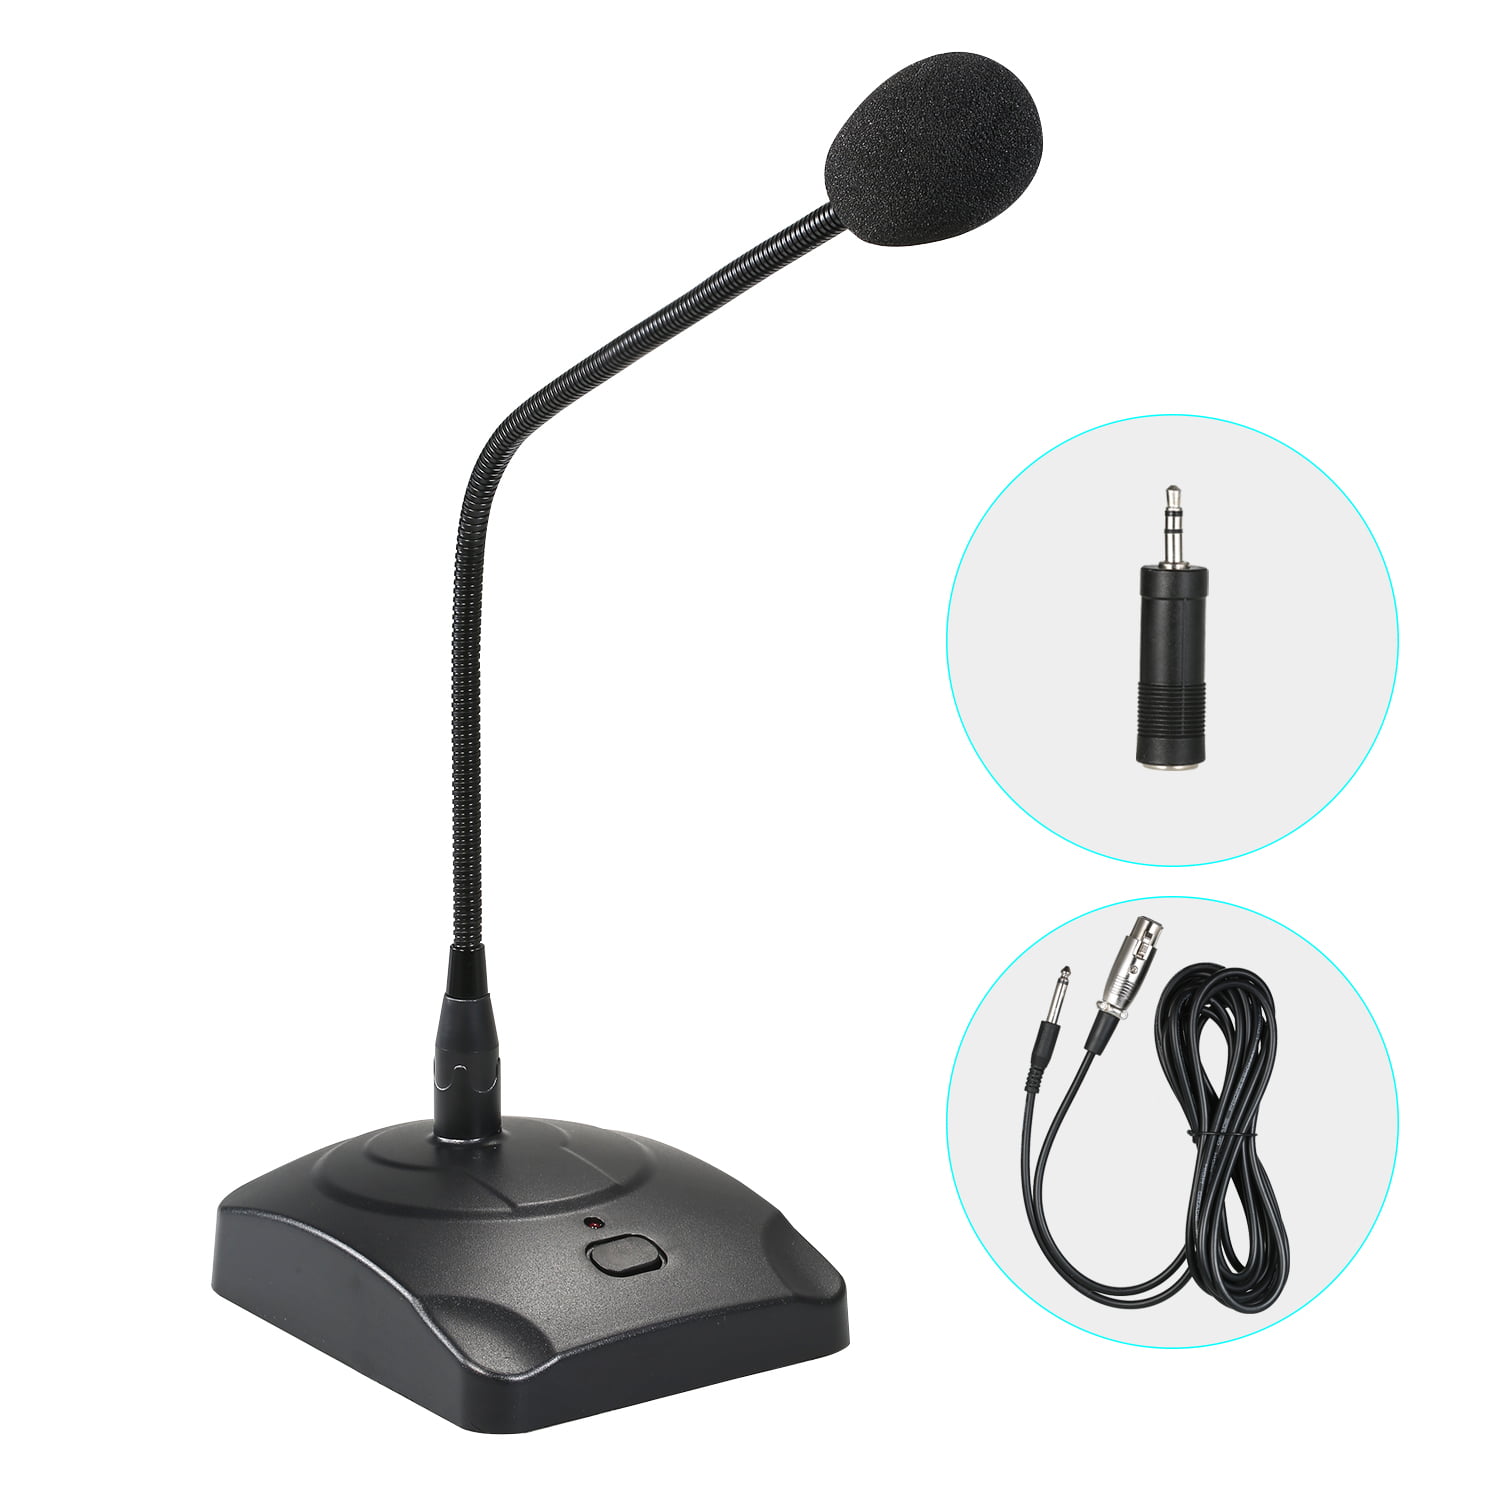 6.5mm Wired Condenser Microphone for Computer PC Desktop Laptop Notebook Recording Gaming Podcasting Microphones 